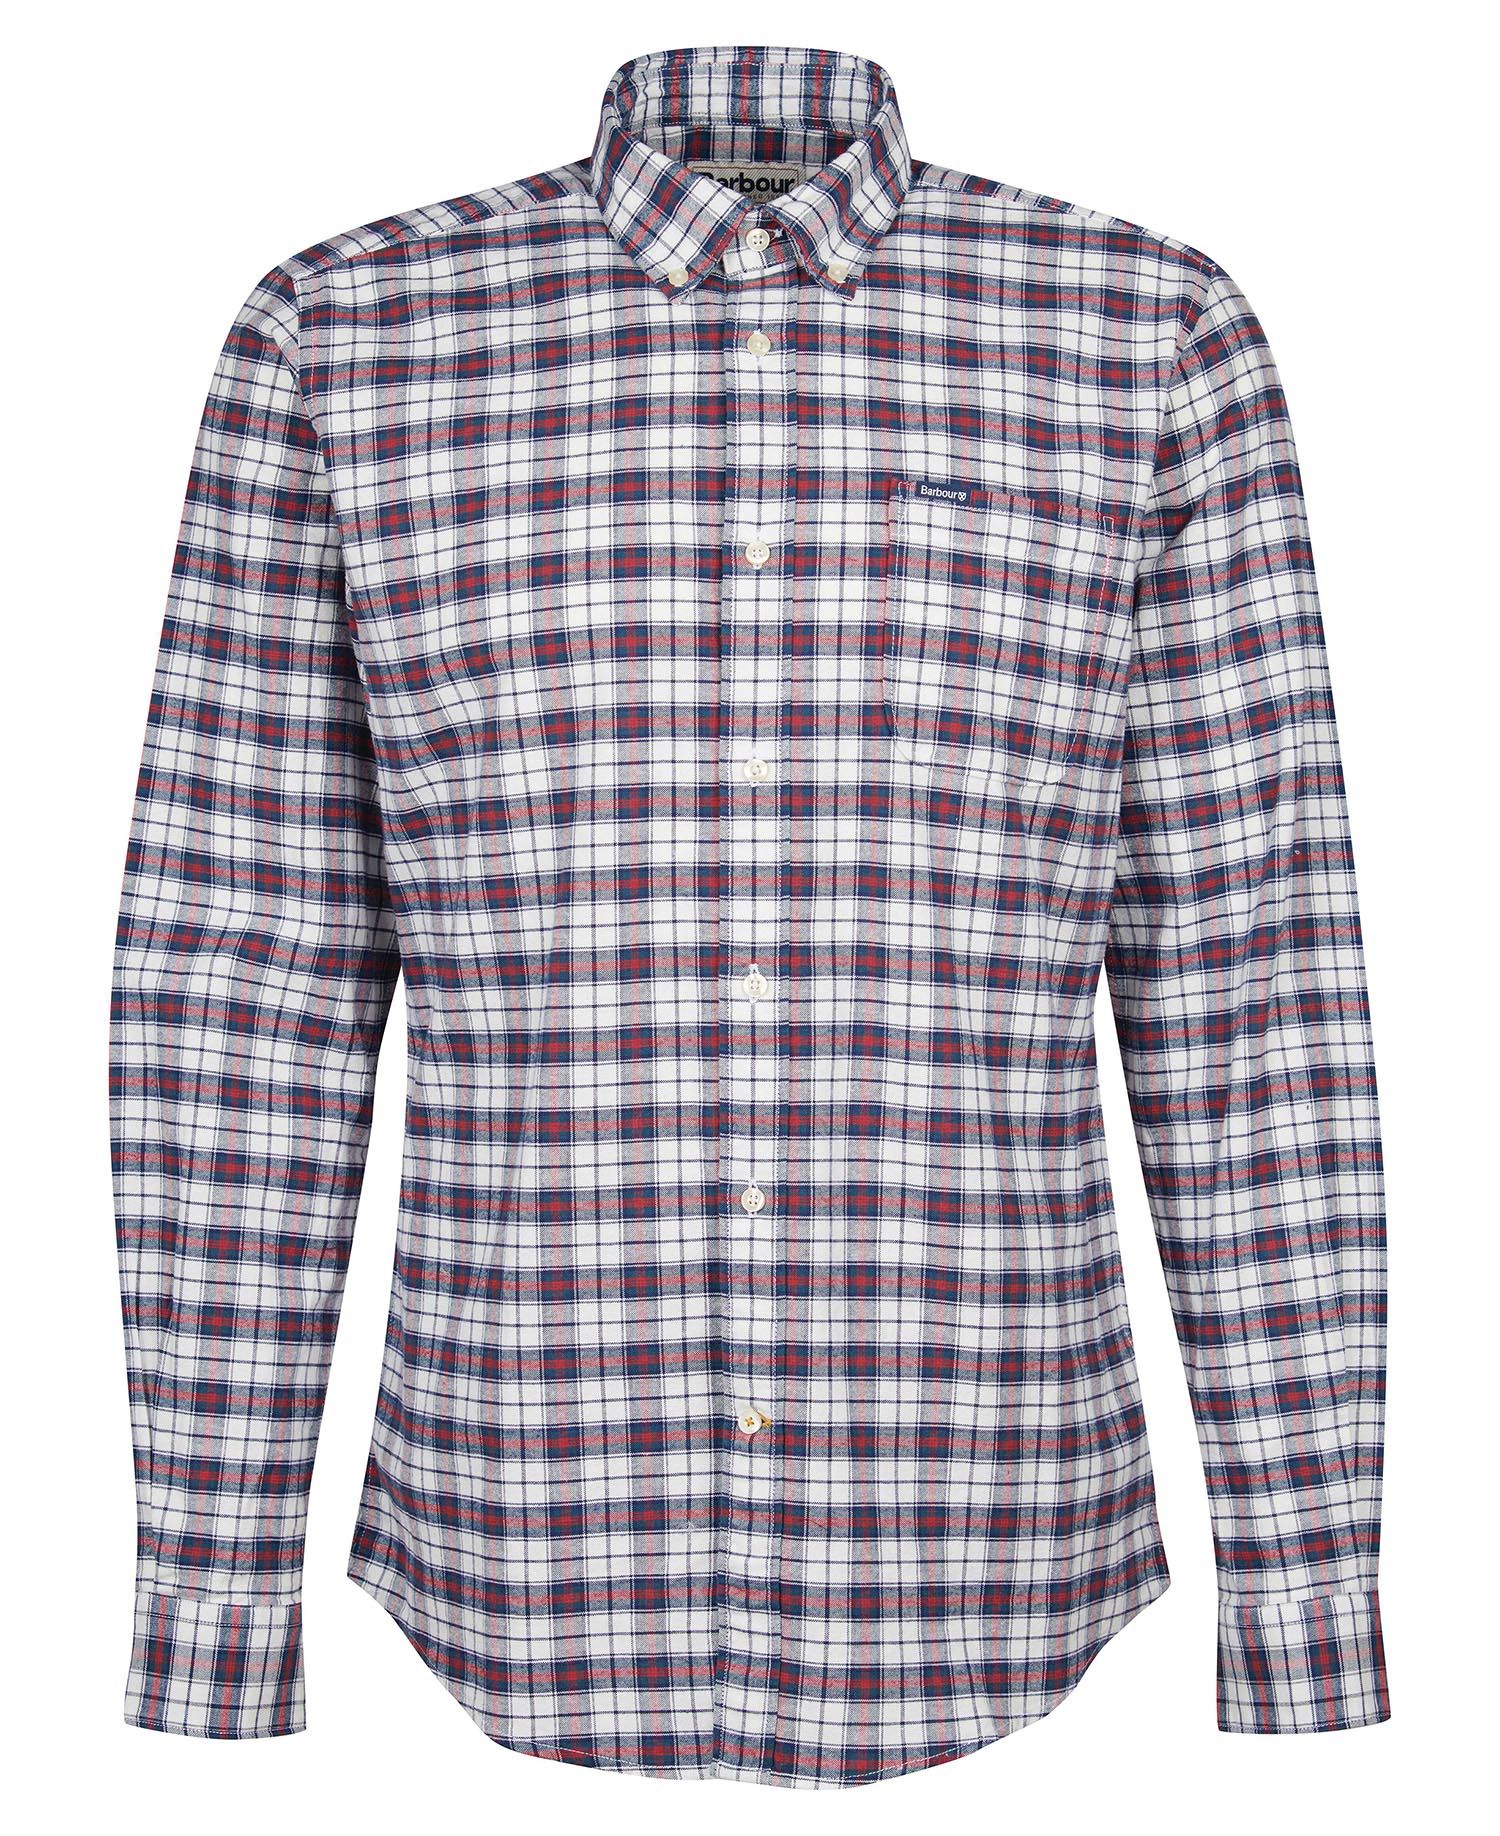 Barbour Benwell Tailored Fit Shirt